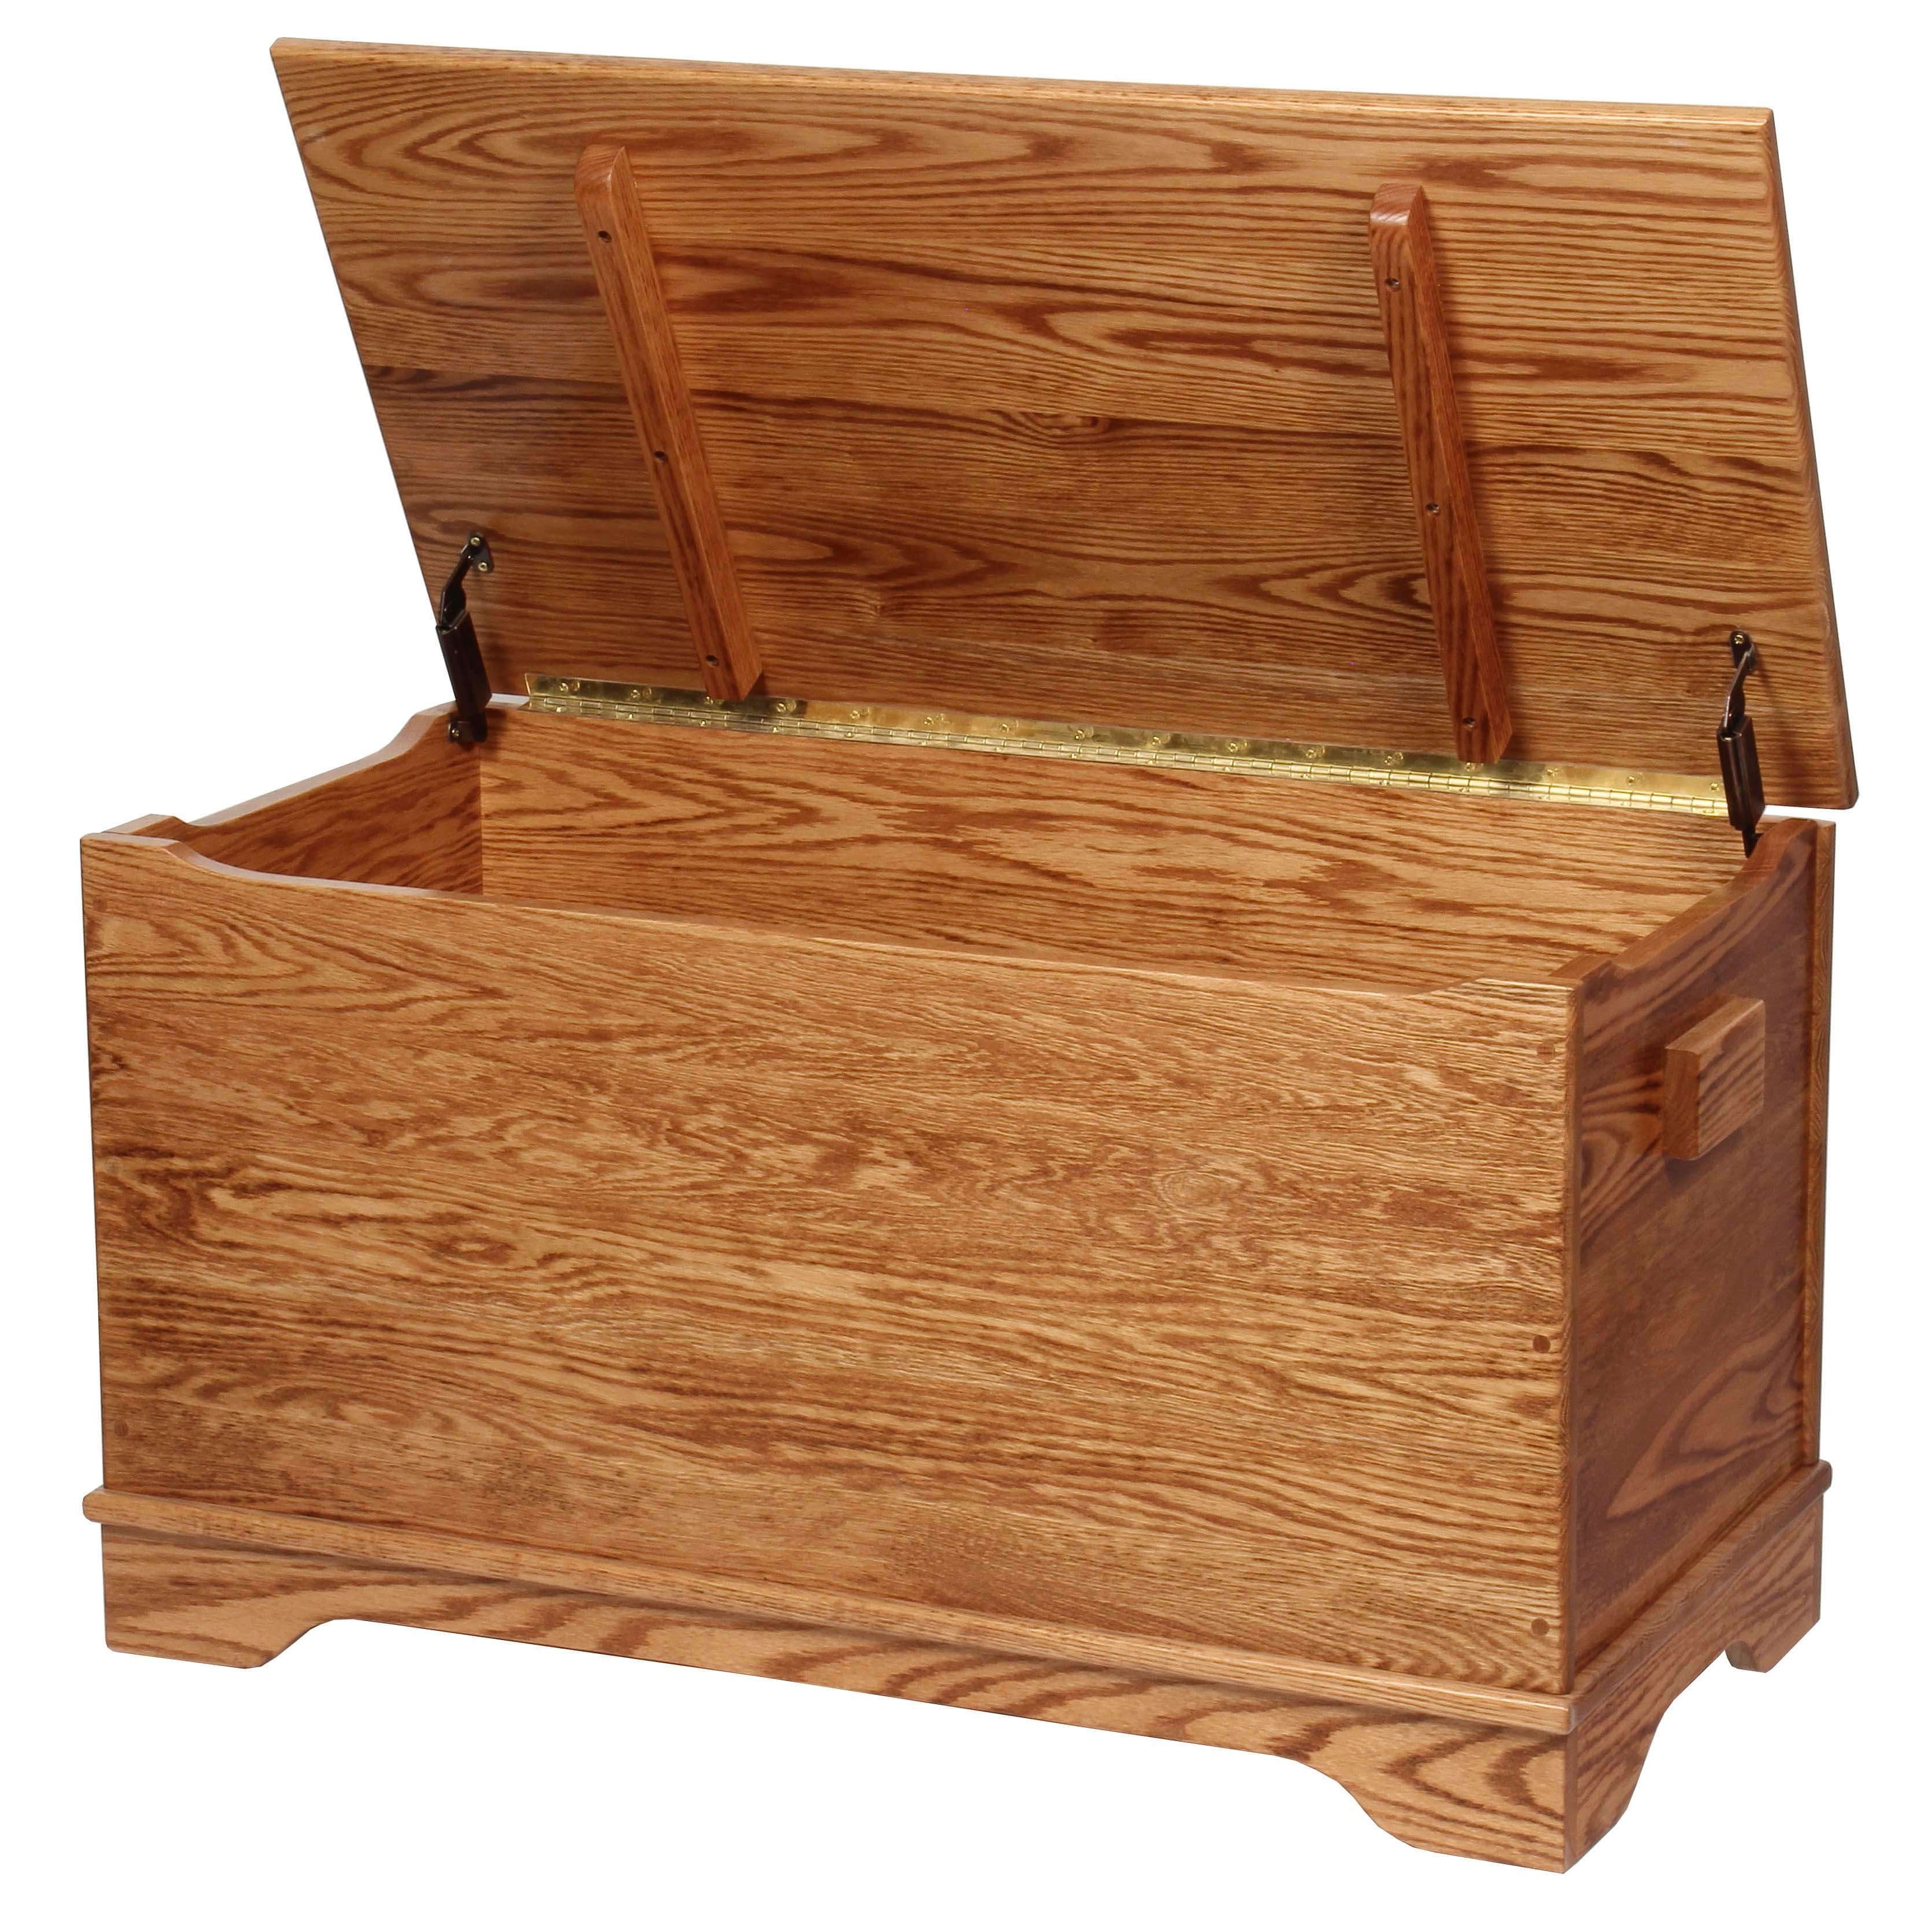 Jaxon American Made Wooden Toy Box – Countryside Amish Furniture In Preferred Jaxon Grey Sideboards (View 14 of 20)